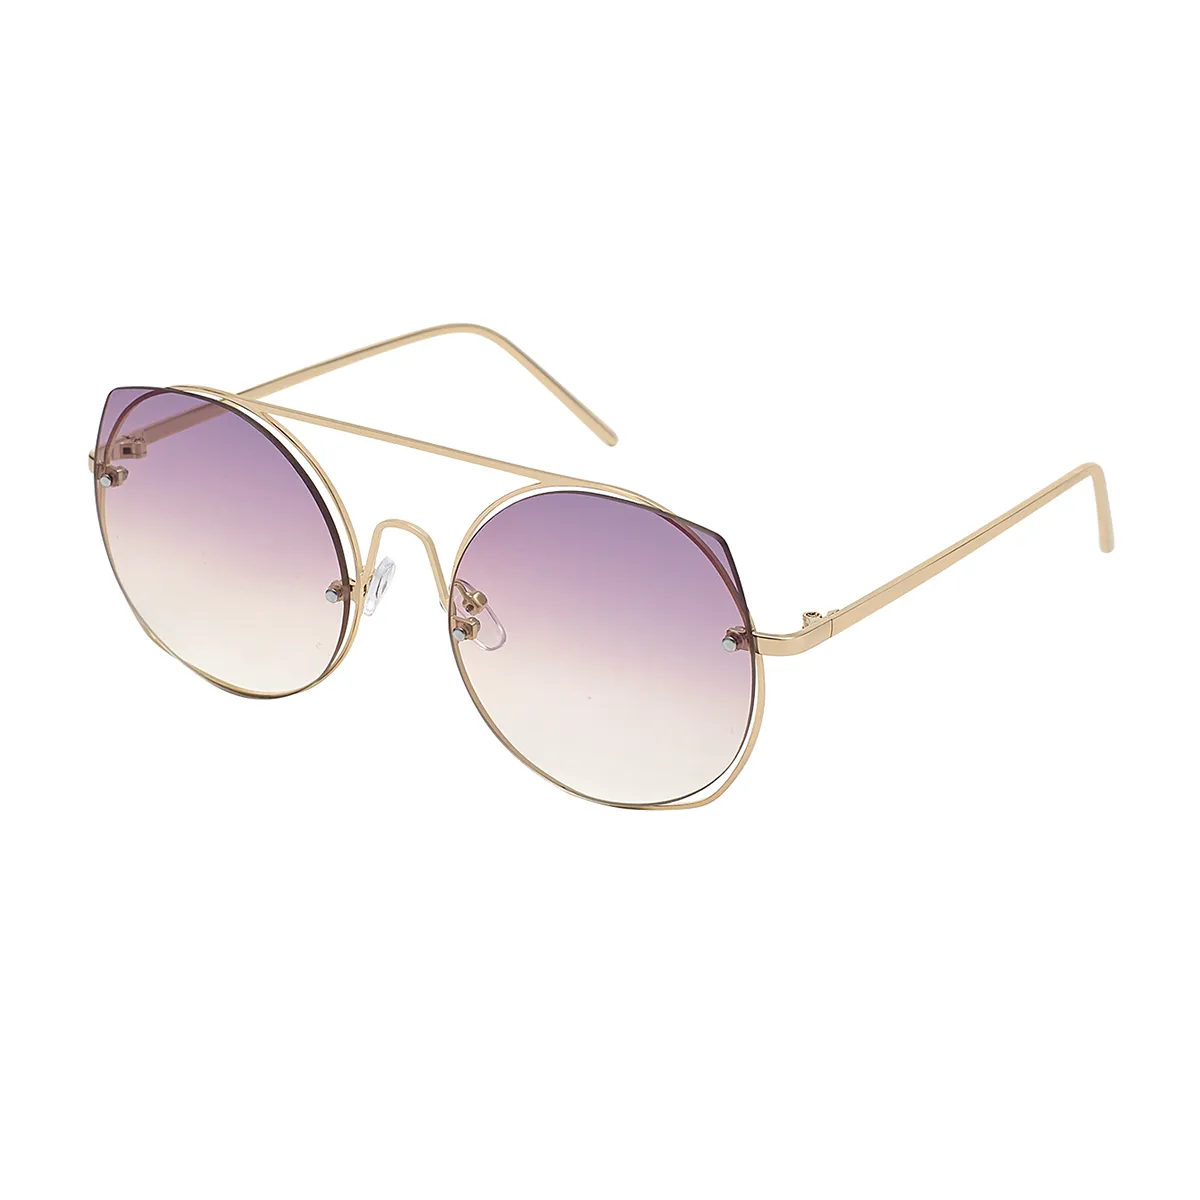 Dolly - Round Gold Sunglasses for Women